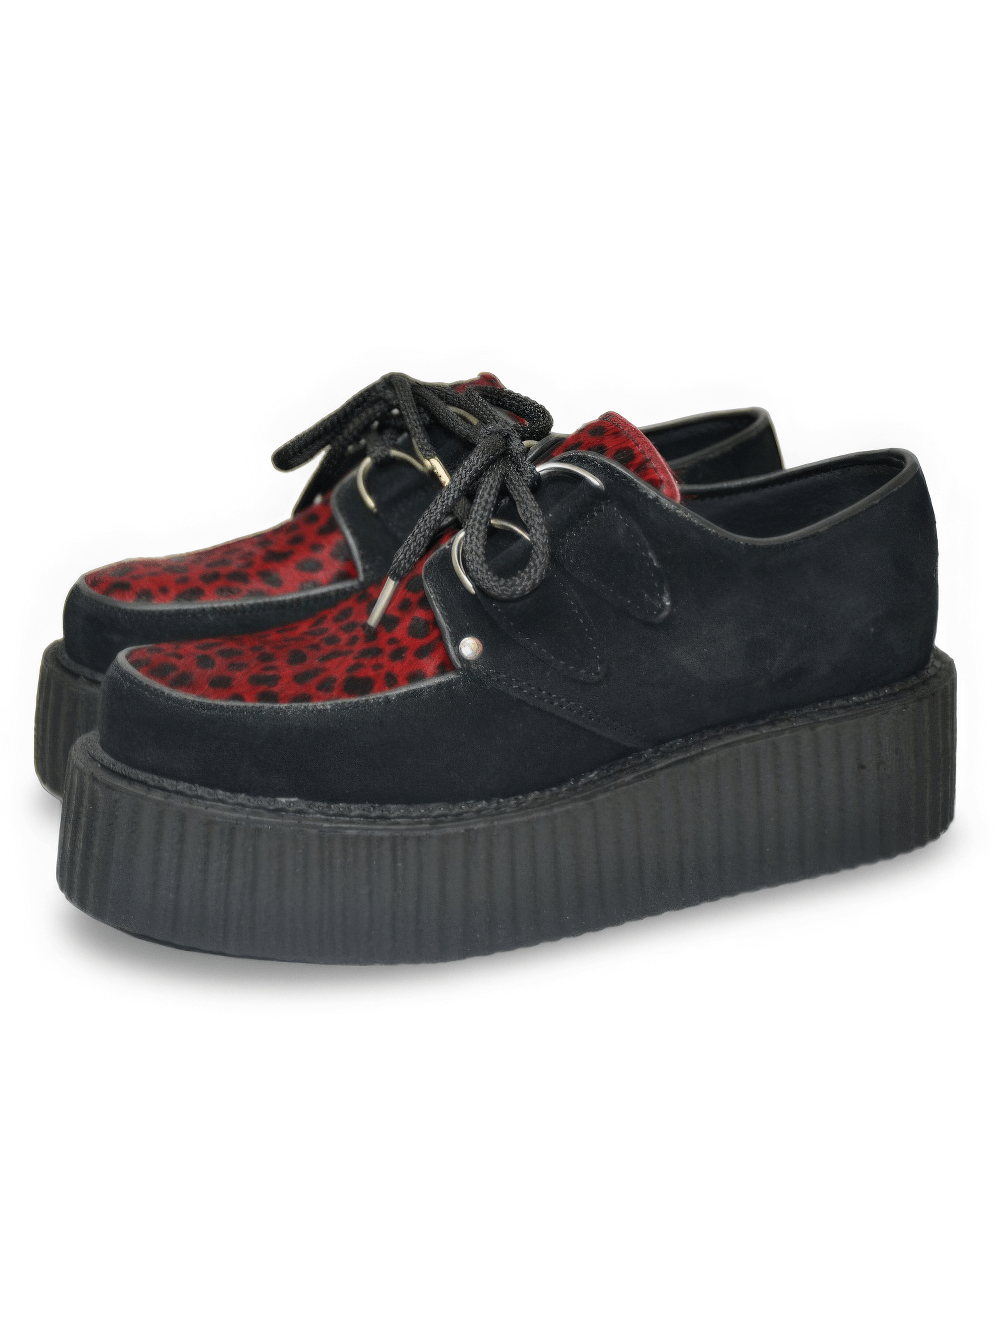 Unisex Black and Red Leopard Creepers in Suede